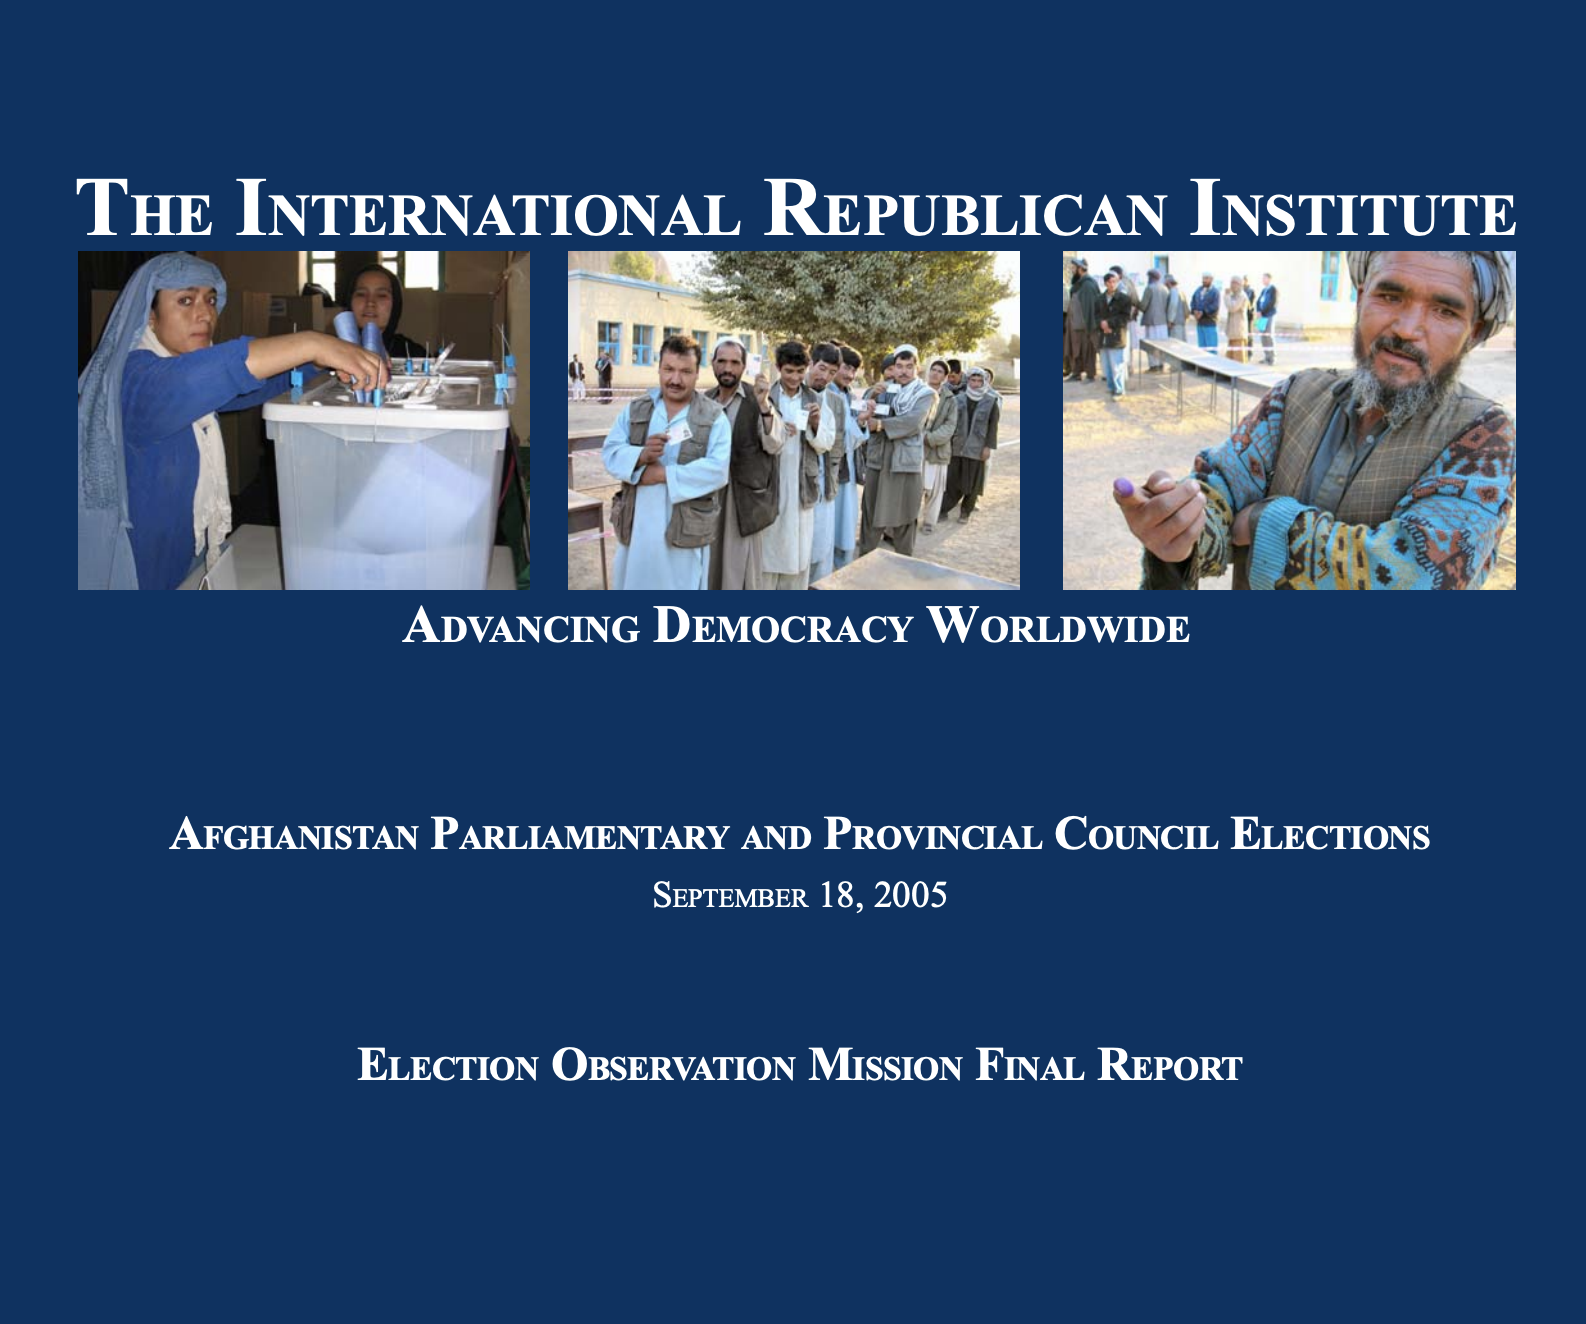 AFGHANISTAN PARLIAMENTARY AND PROVINCIAL COUNCIL ELECTIONS SEPTEMBER 18, 2005 ELECTION OBSERVATION MISSION FINAL REPORT